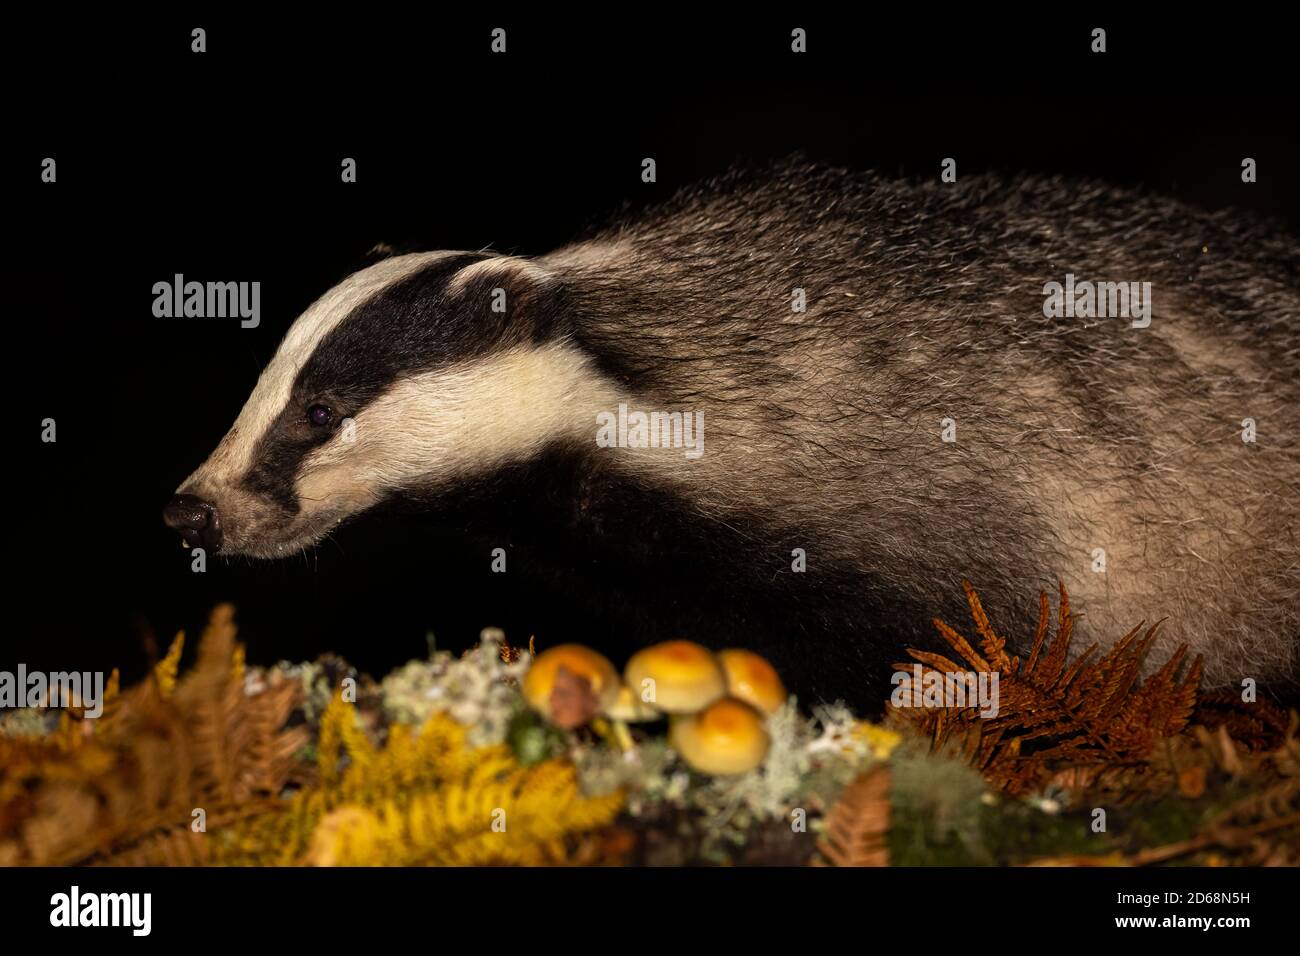 Badger (Scientific name: Meles Meles) Wild, native badger facing left in natural woodland habitat with ferns and toadstools.  Night-time. Landscape Stock Photo